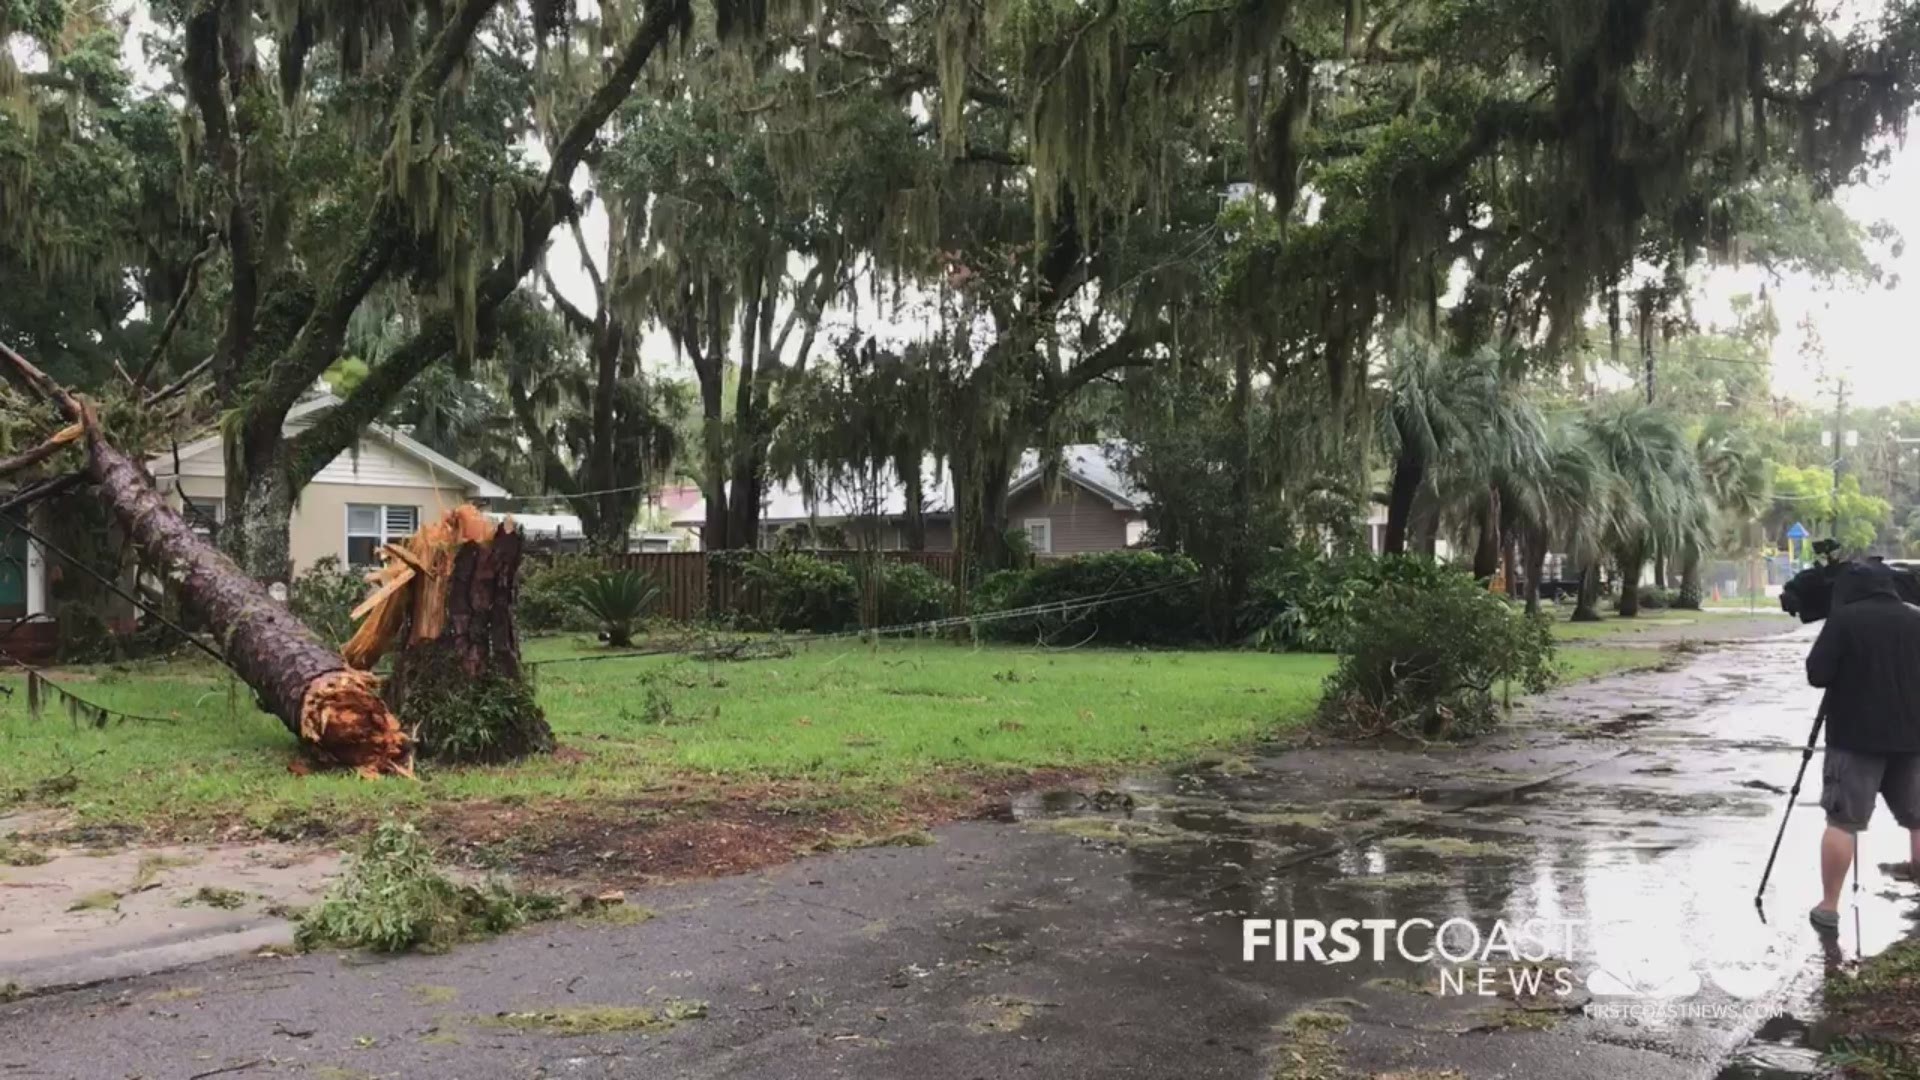 The Jacksonville Fire and Rescue Department said debris from trees are falling all over the roads, and there are downed power lines in multiple locations in the Ortega area.